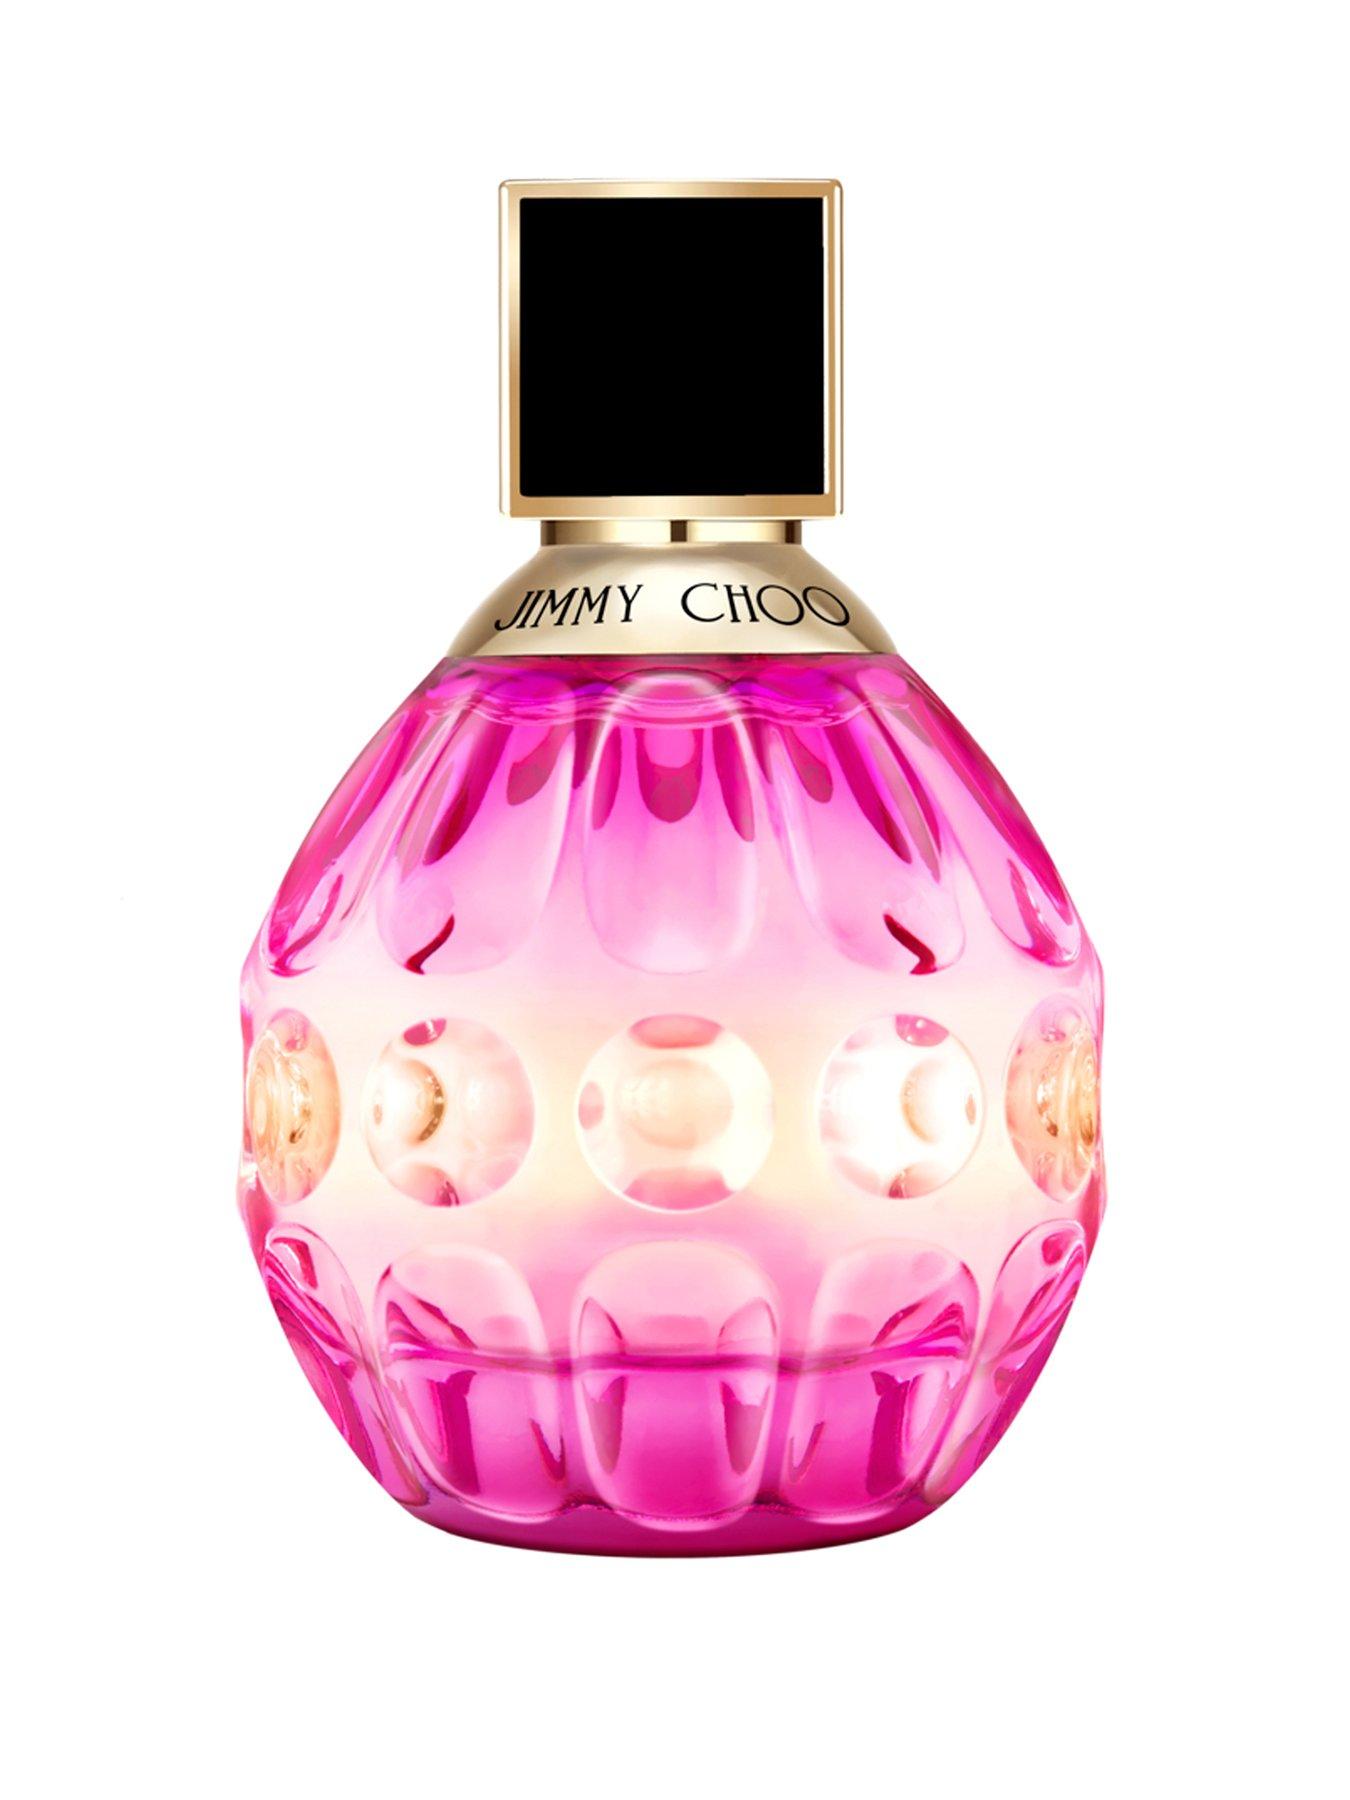 Ghost Dream Eau de Parfum - Captivating, Feminine and Delicate Fragrance  for Women - Floral Oriental Scent with Notes of Rose, Violet and Musk -  Fall